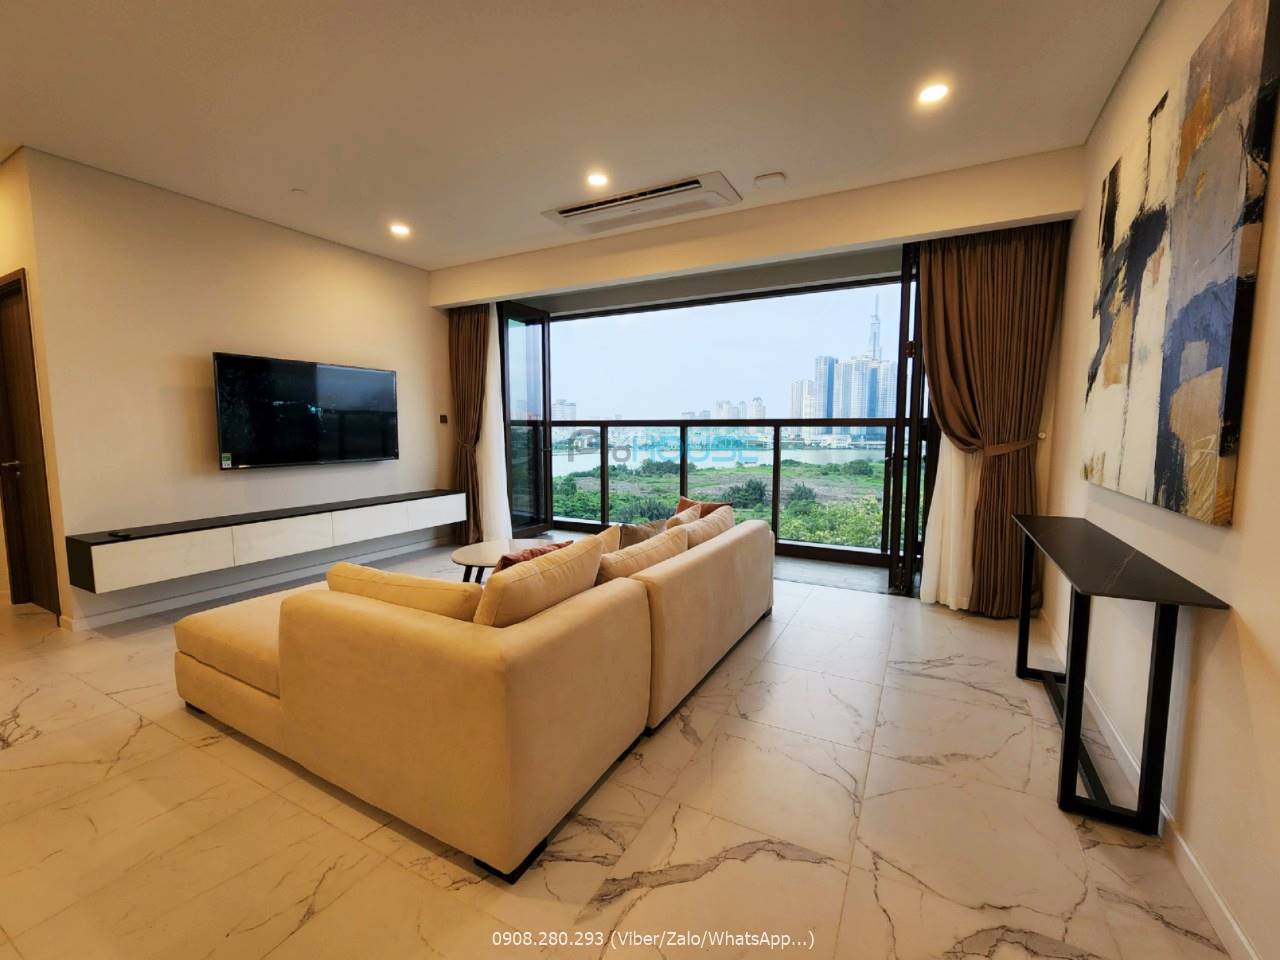 Modern 3 bedroom apartment for rent in The Metropole Thu Thiem